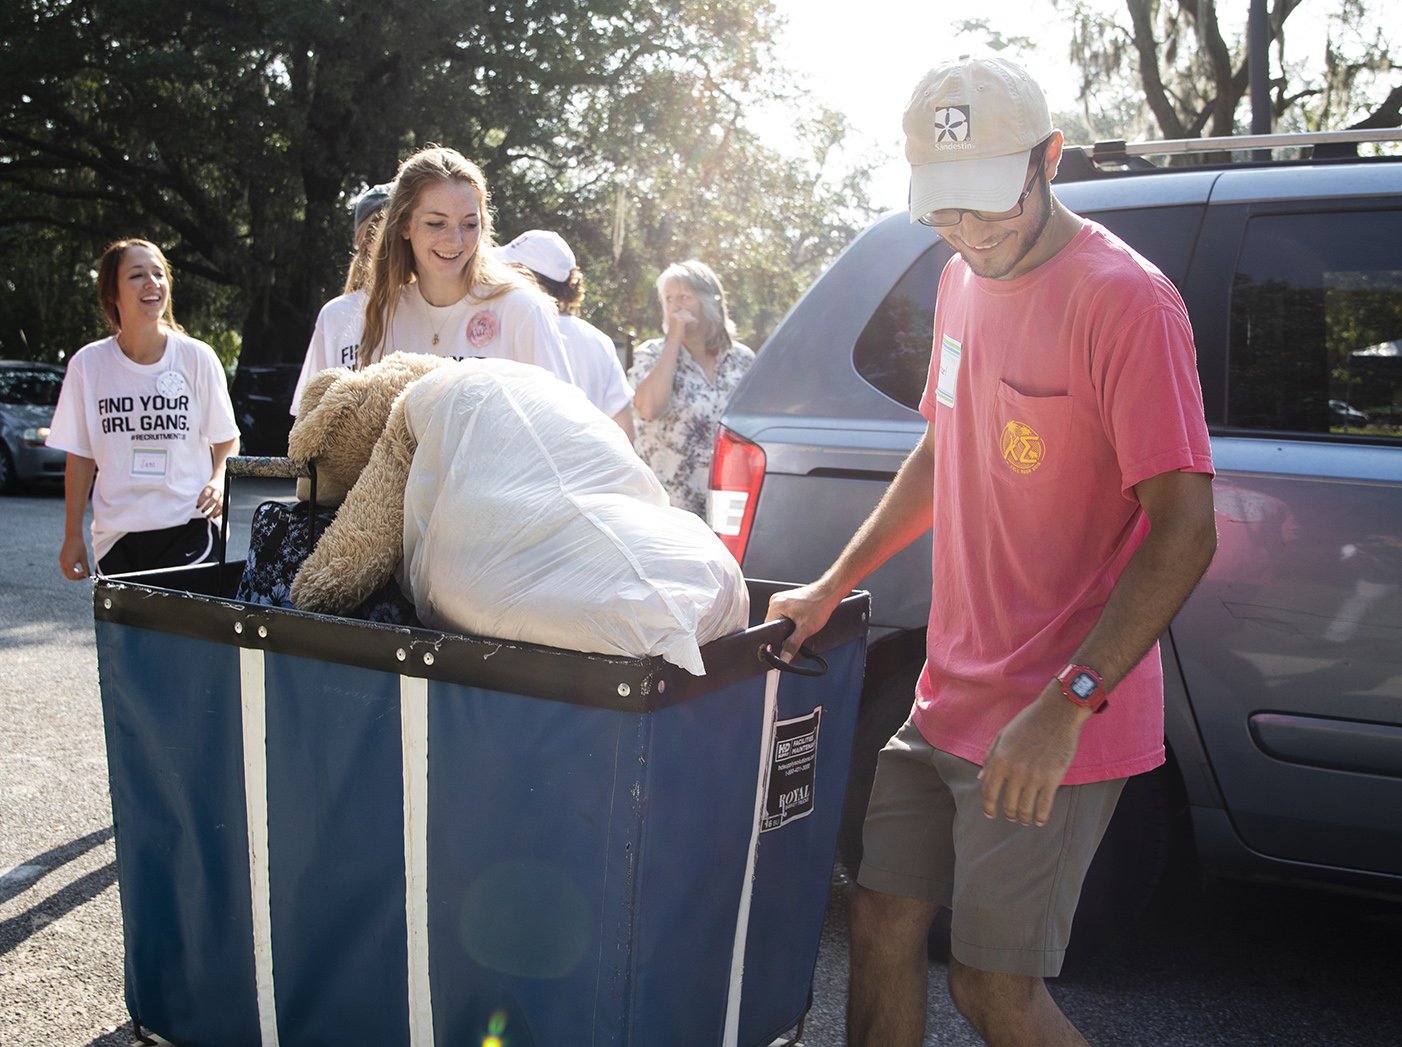 UWf students on Move-In Day 2018